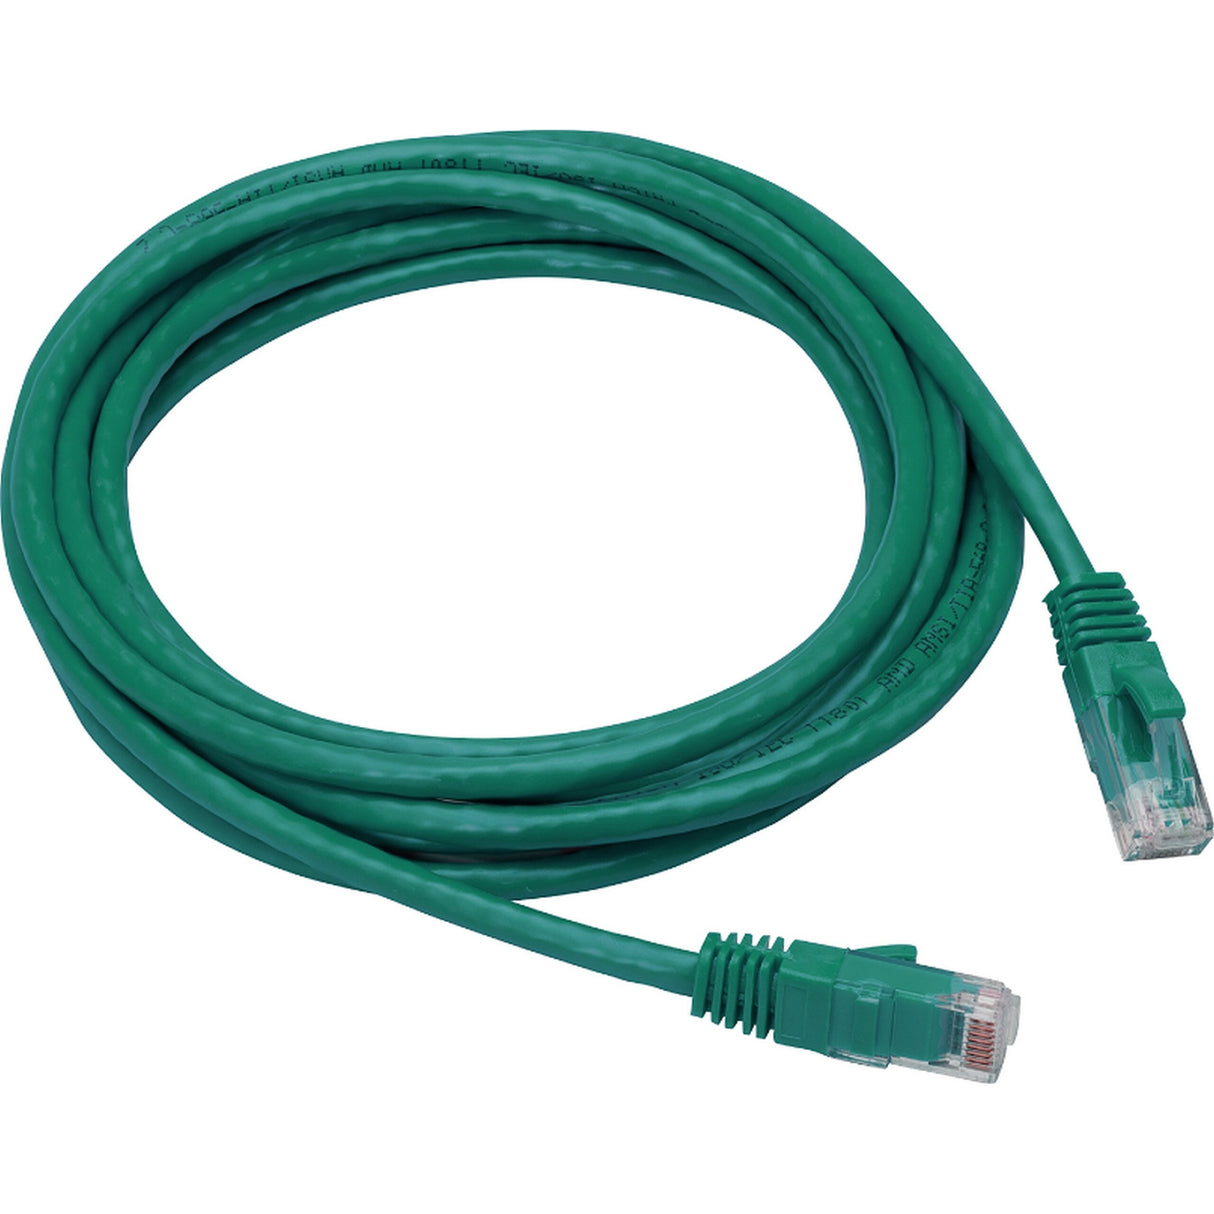 Liberty AV 152G5U5001 Category 5E True 24AWG Patch Cable, 1 Foot, Green